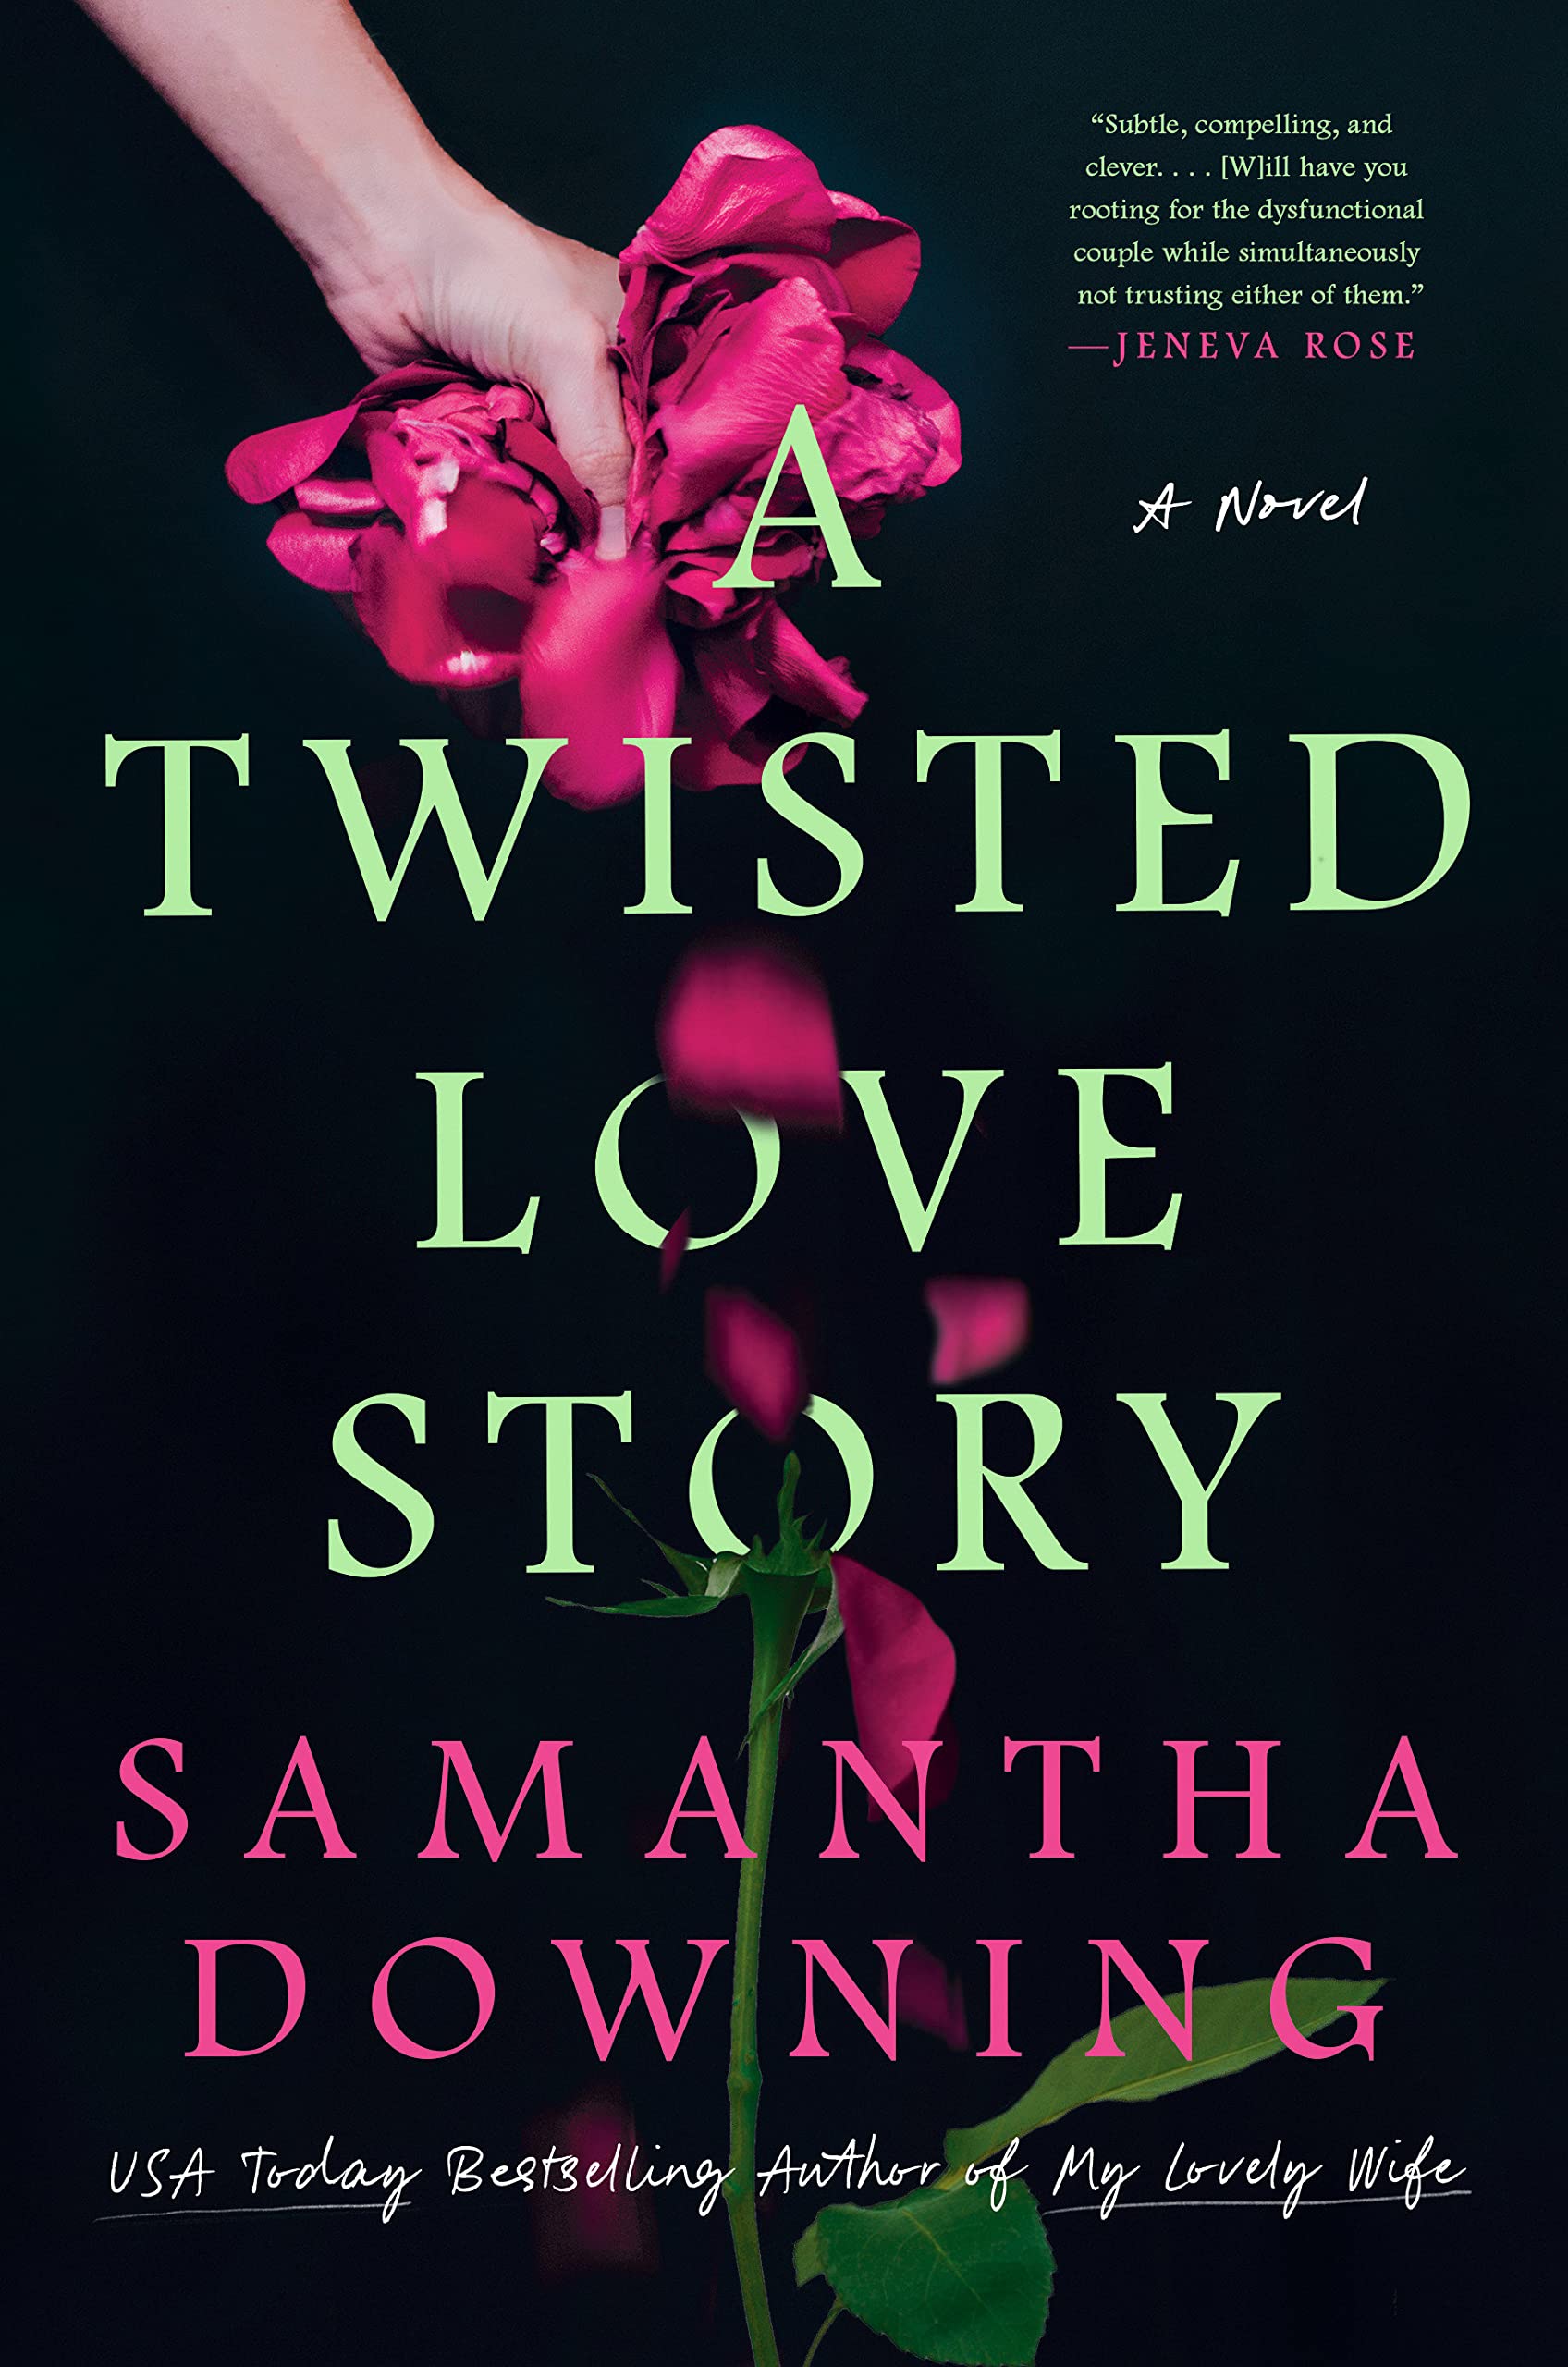 Image for "A Twisted Love Story"